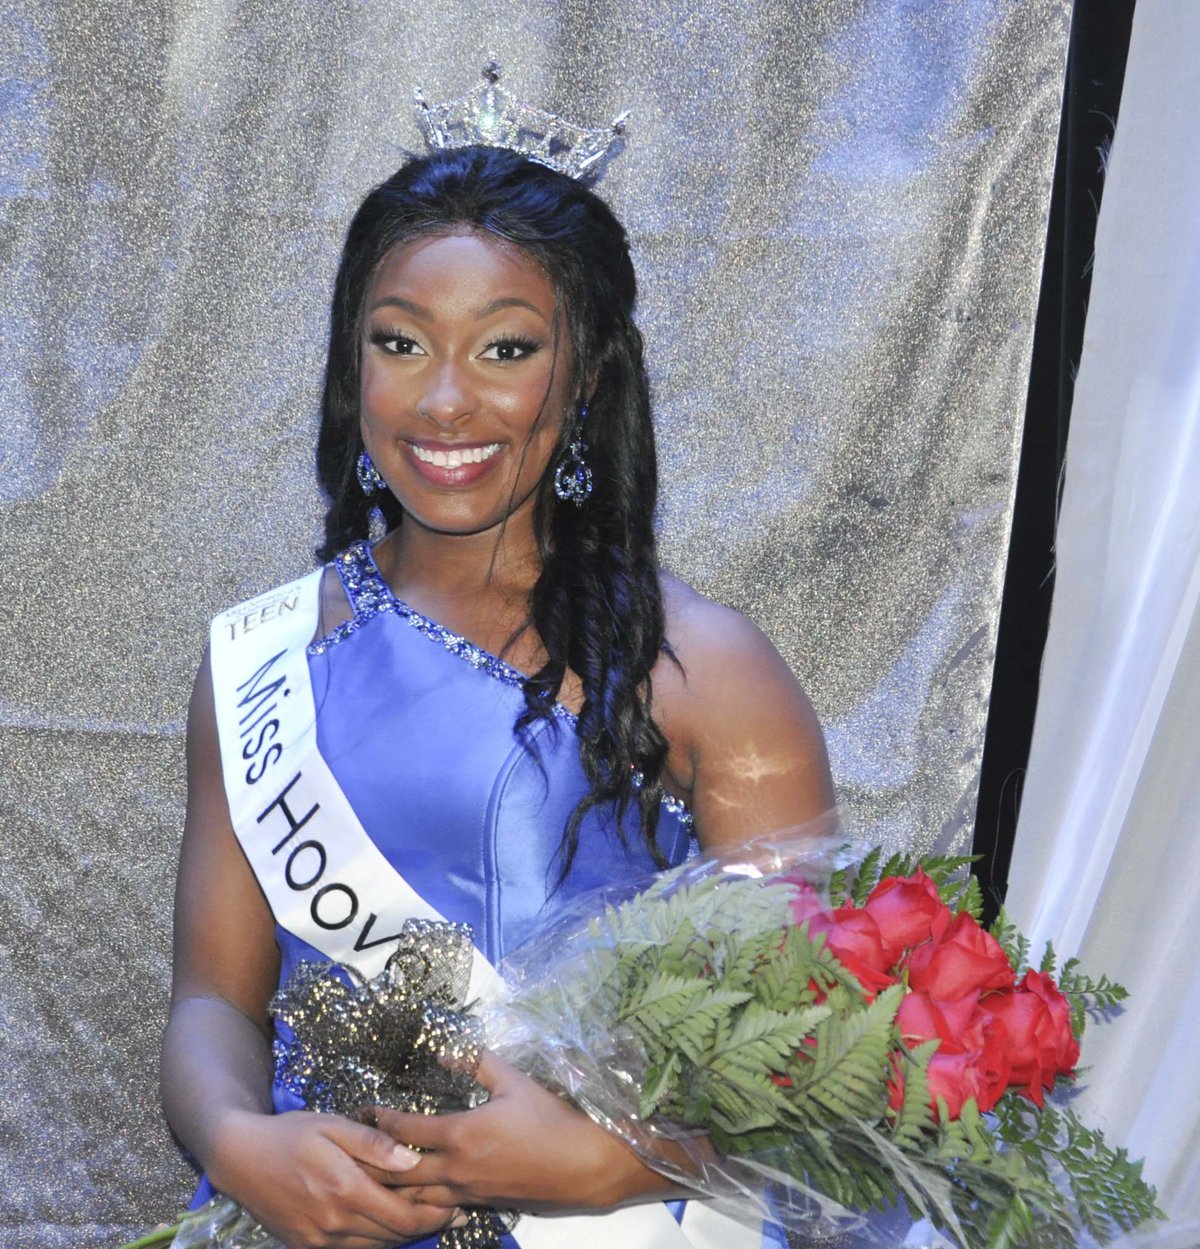 20-year-old Auburn student wins Miss Hoover 2022 crown - HooverSun.com